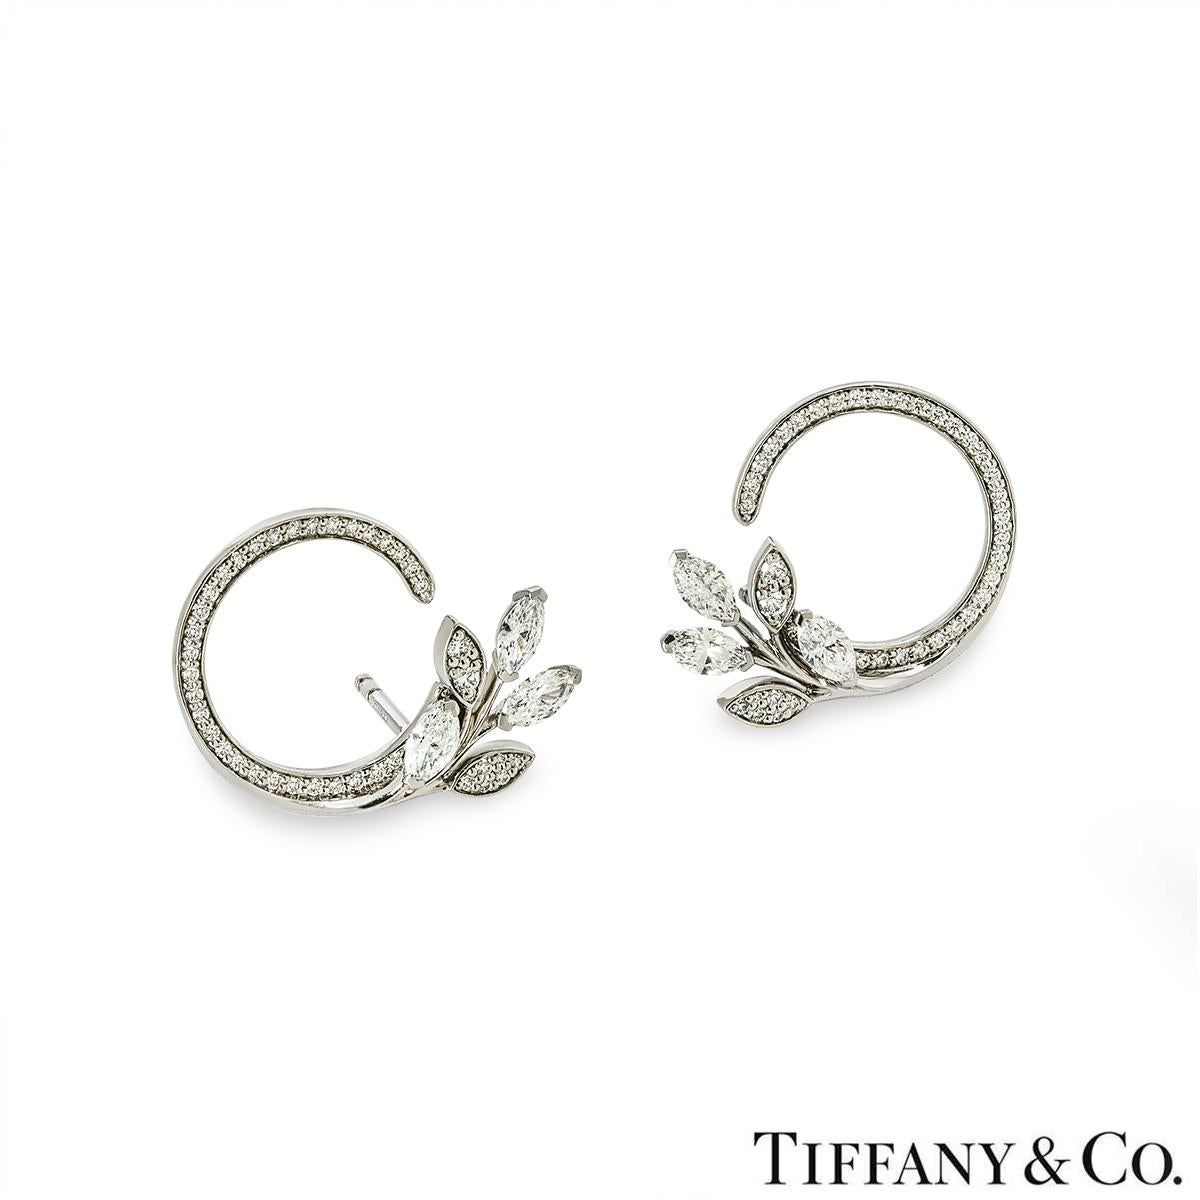 A stunning pair of platinum  earrings by Tiffany & Co. from the Victoria Vine Circle collection. The earrings start with a single row of round brilliant cut diamonds forming an incomplete circle, leading into 3 marquise cut diamonds accompanied by